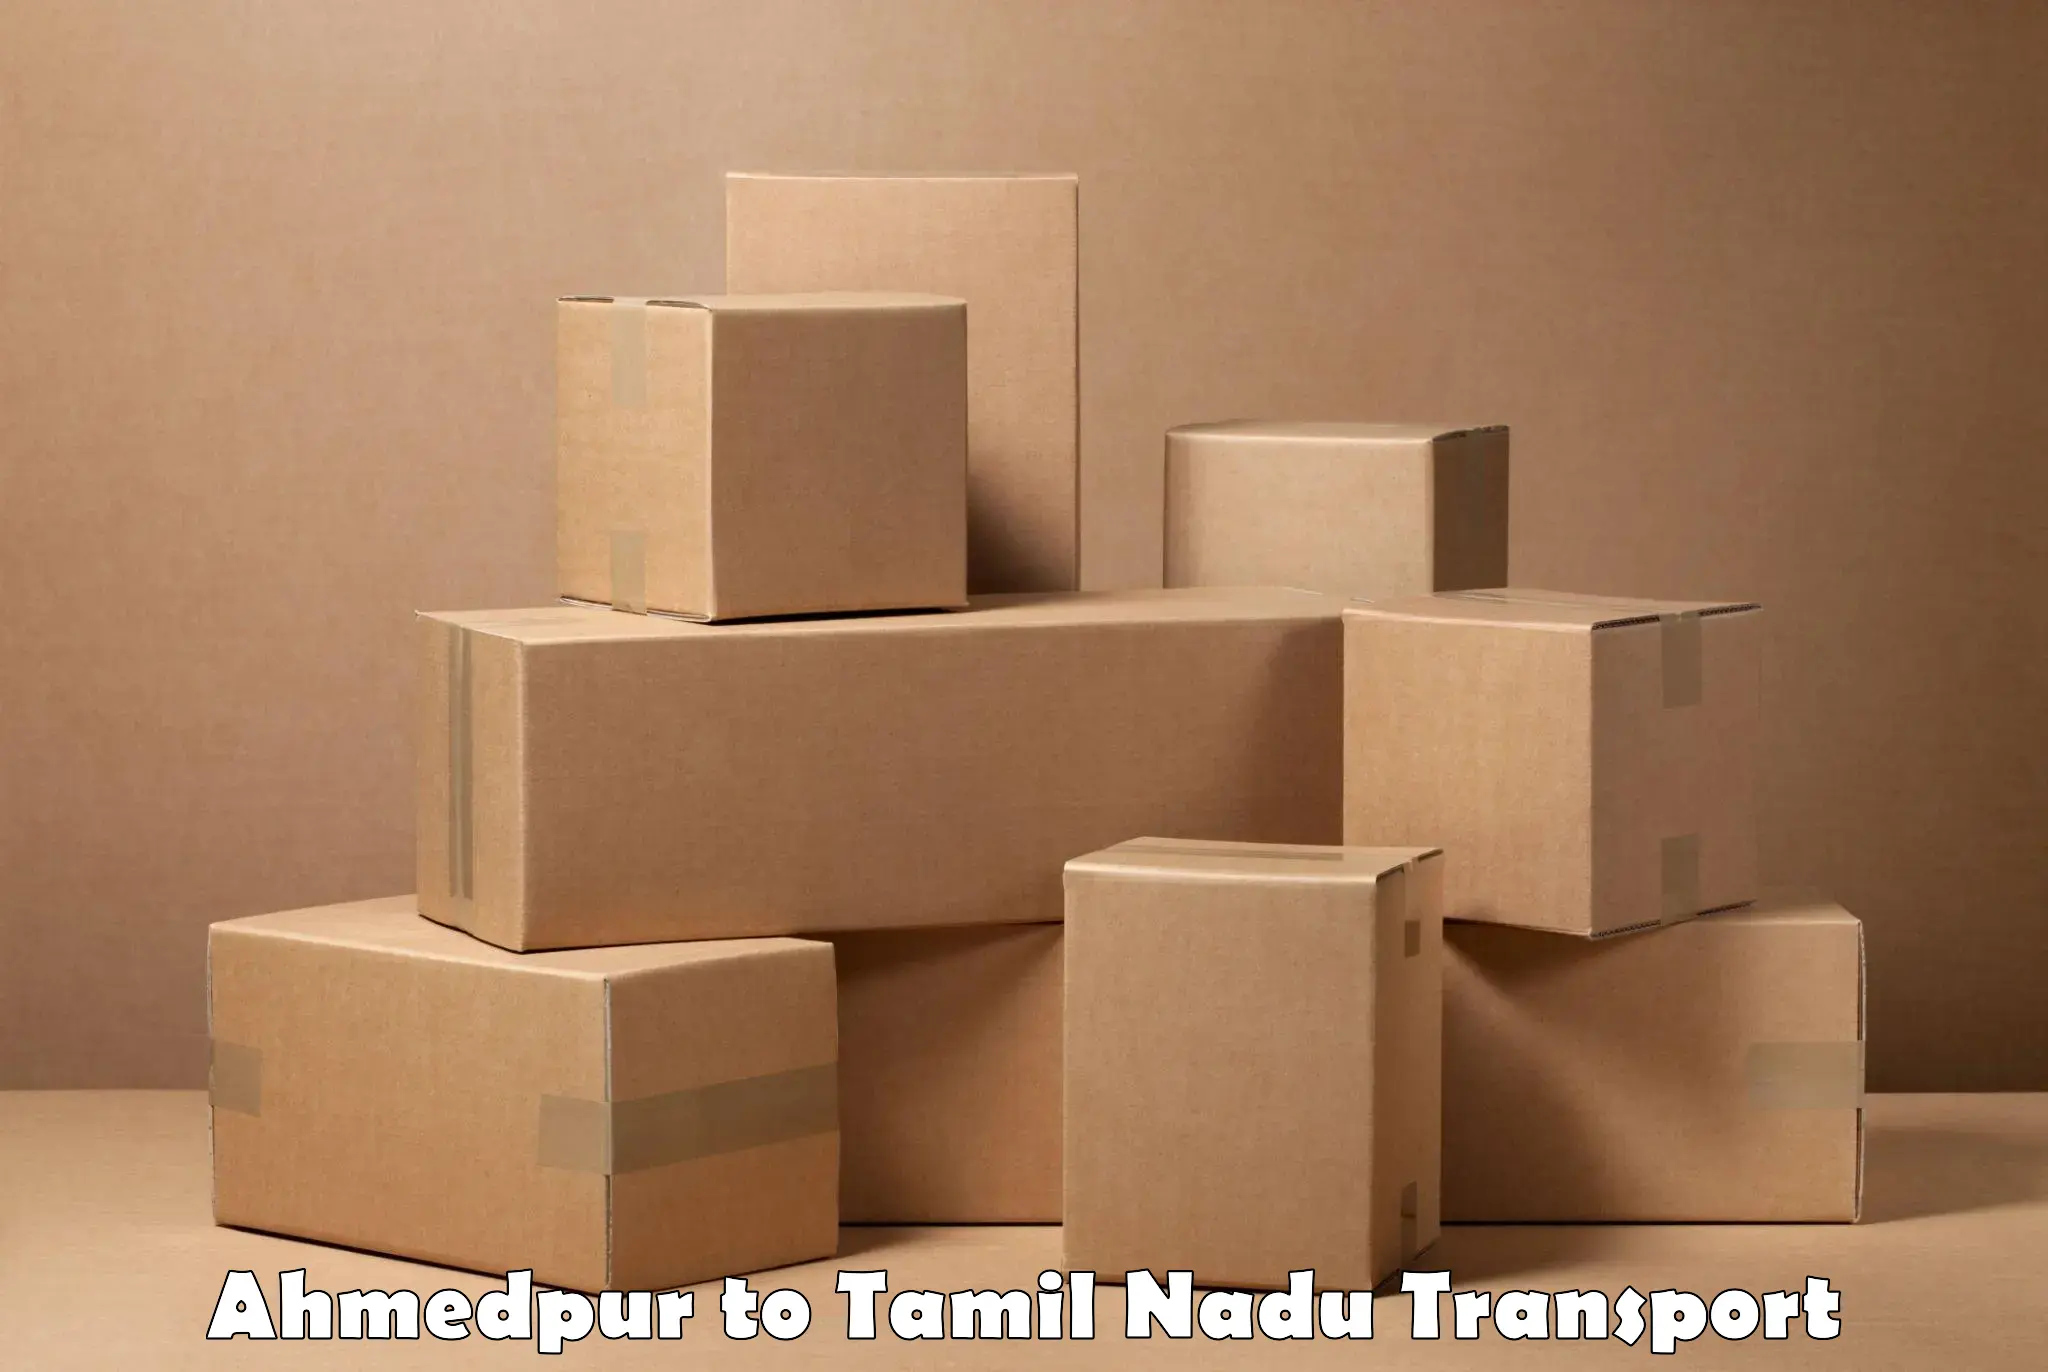 Truck transport companies in India Ahmedpur to Vellore